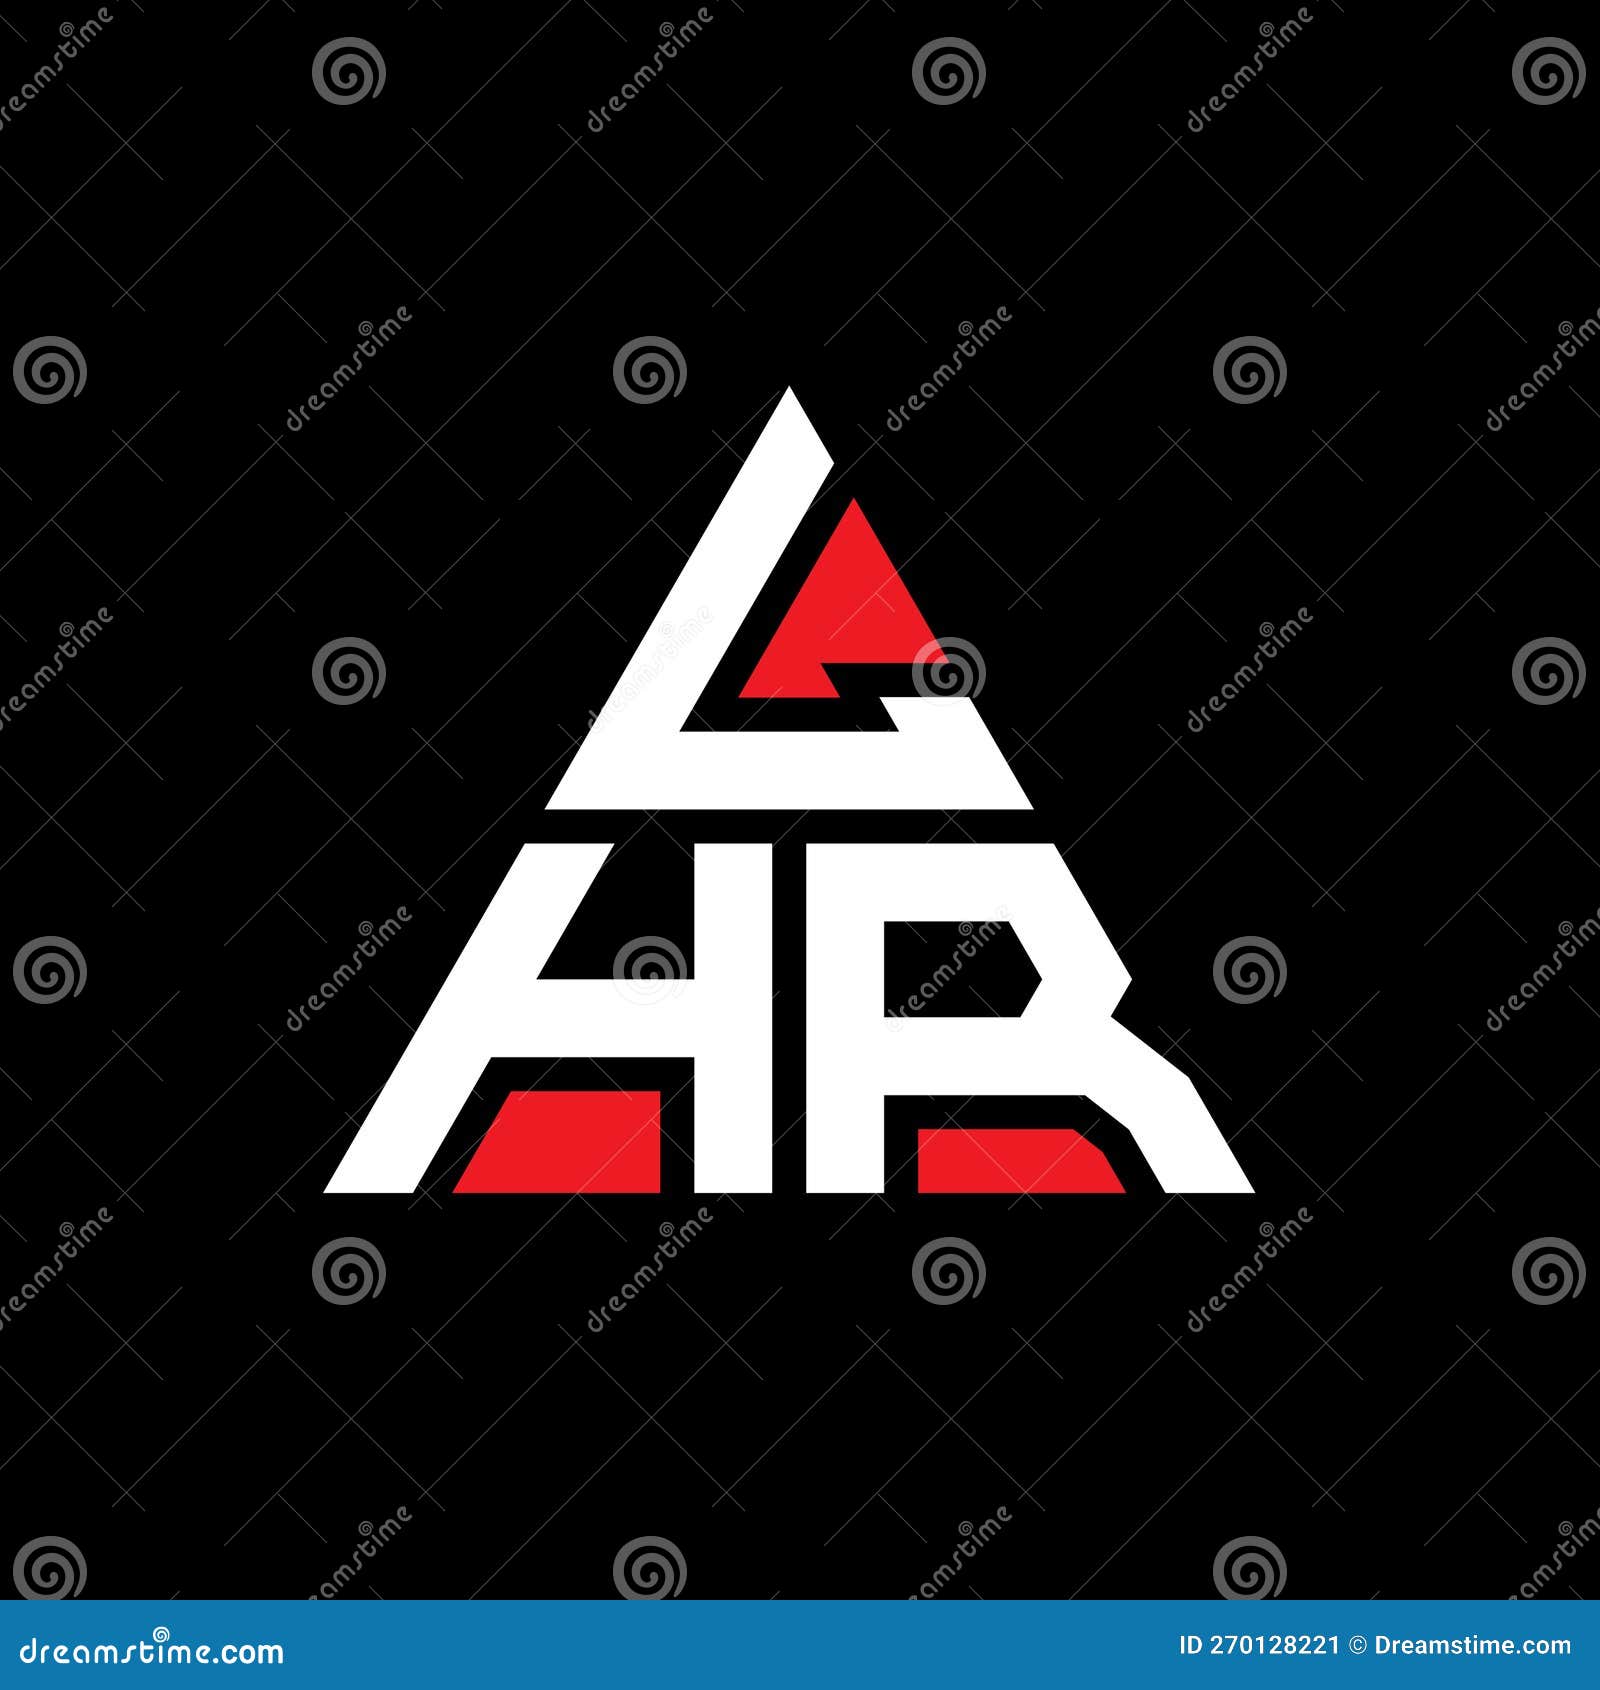 lhr triangle letter logo  with triangle . lhr triangle logo  monogram. lhr triangle  logo template with red